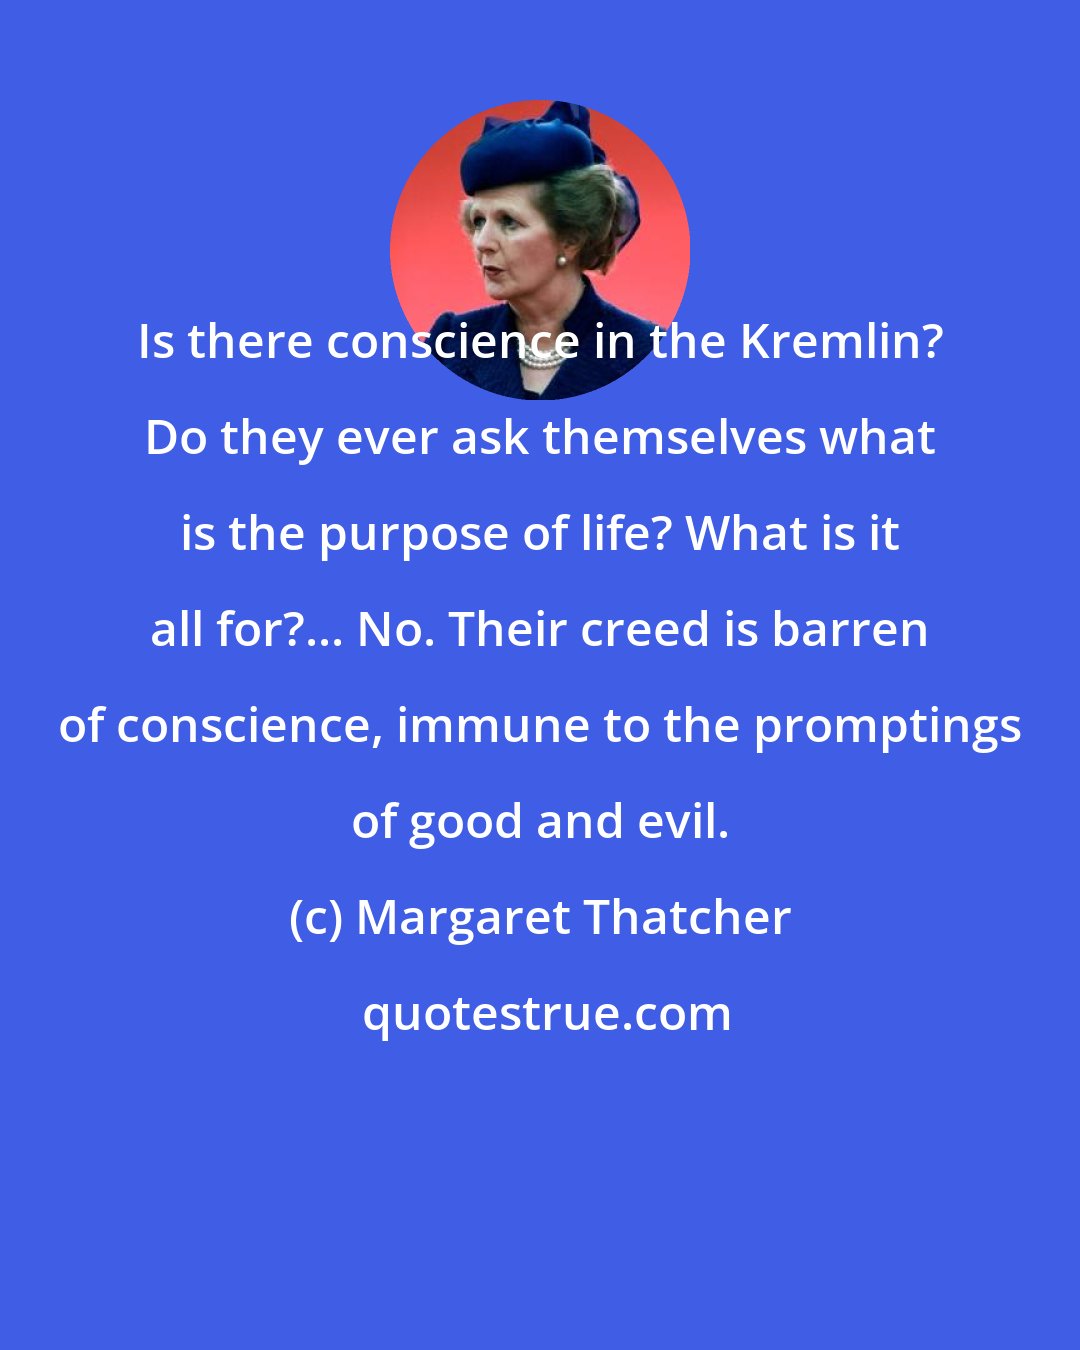 Margaret Thatcher: Is there conscience in the Kremlin? Do they ever ask themselves what is the purpose of life? What is it all for?... No. Their creed is barren of conscience, immune to the promptings of good and evil.